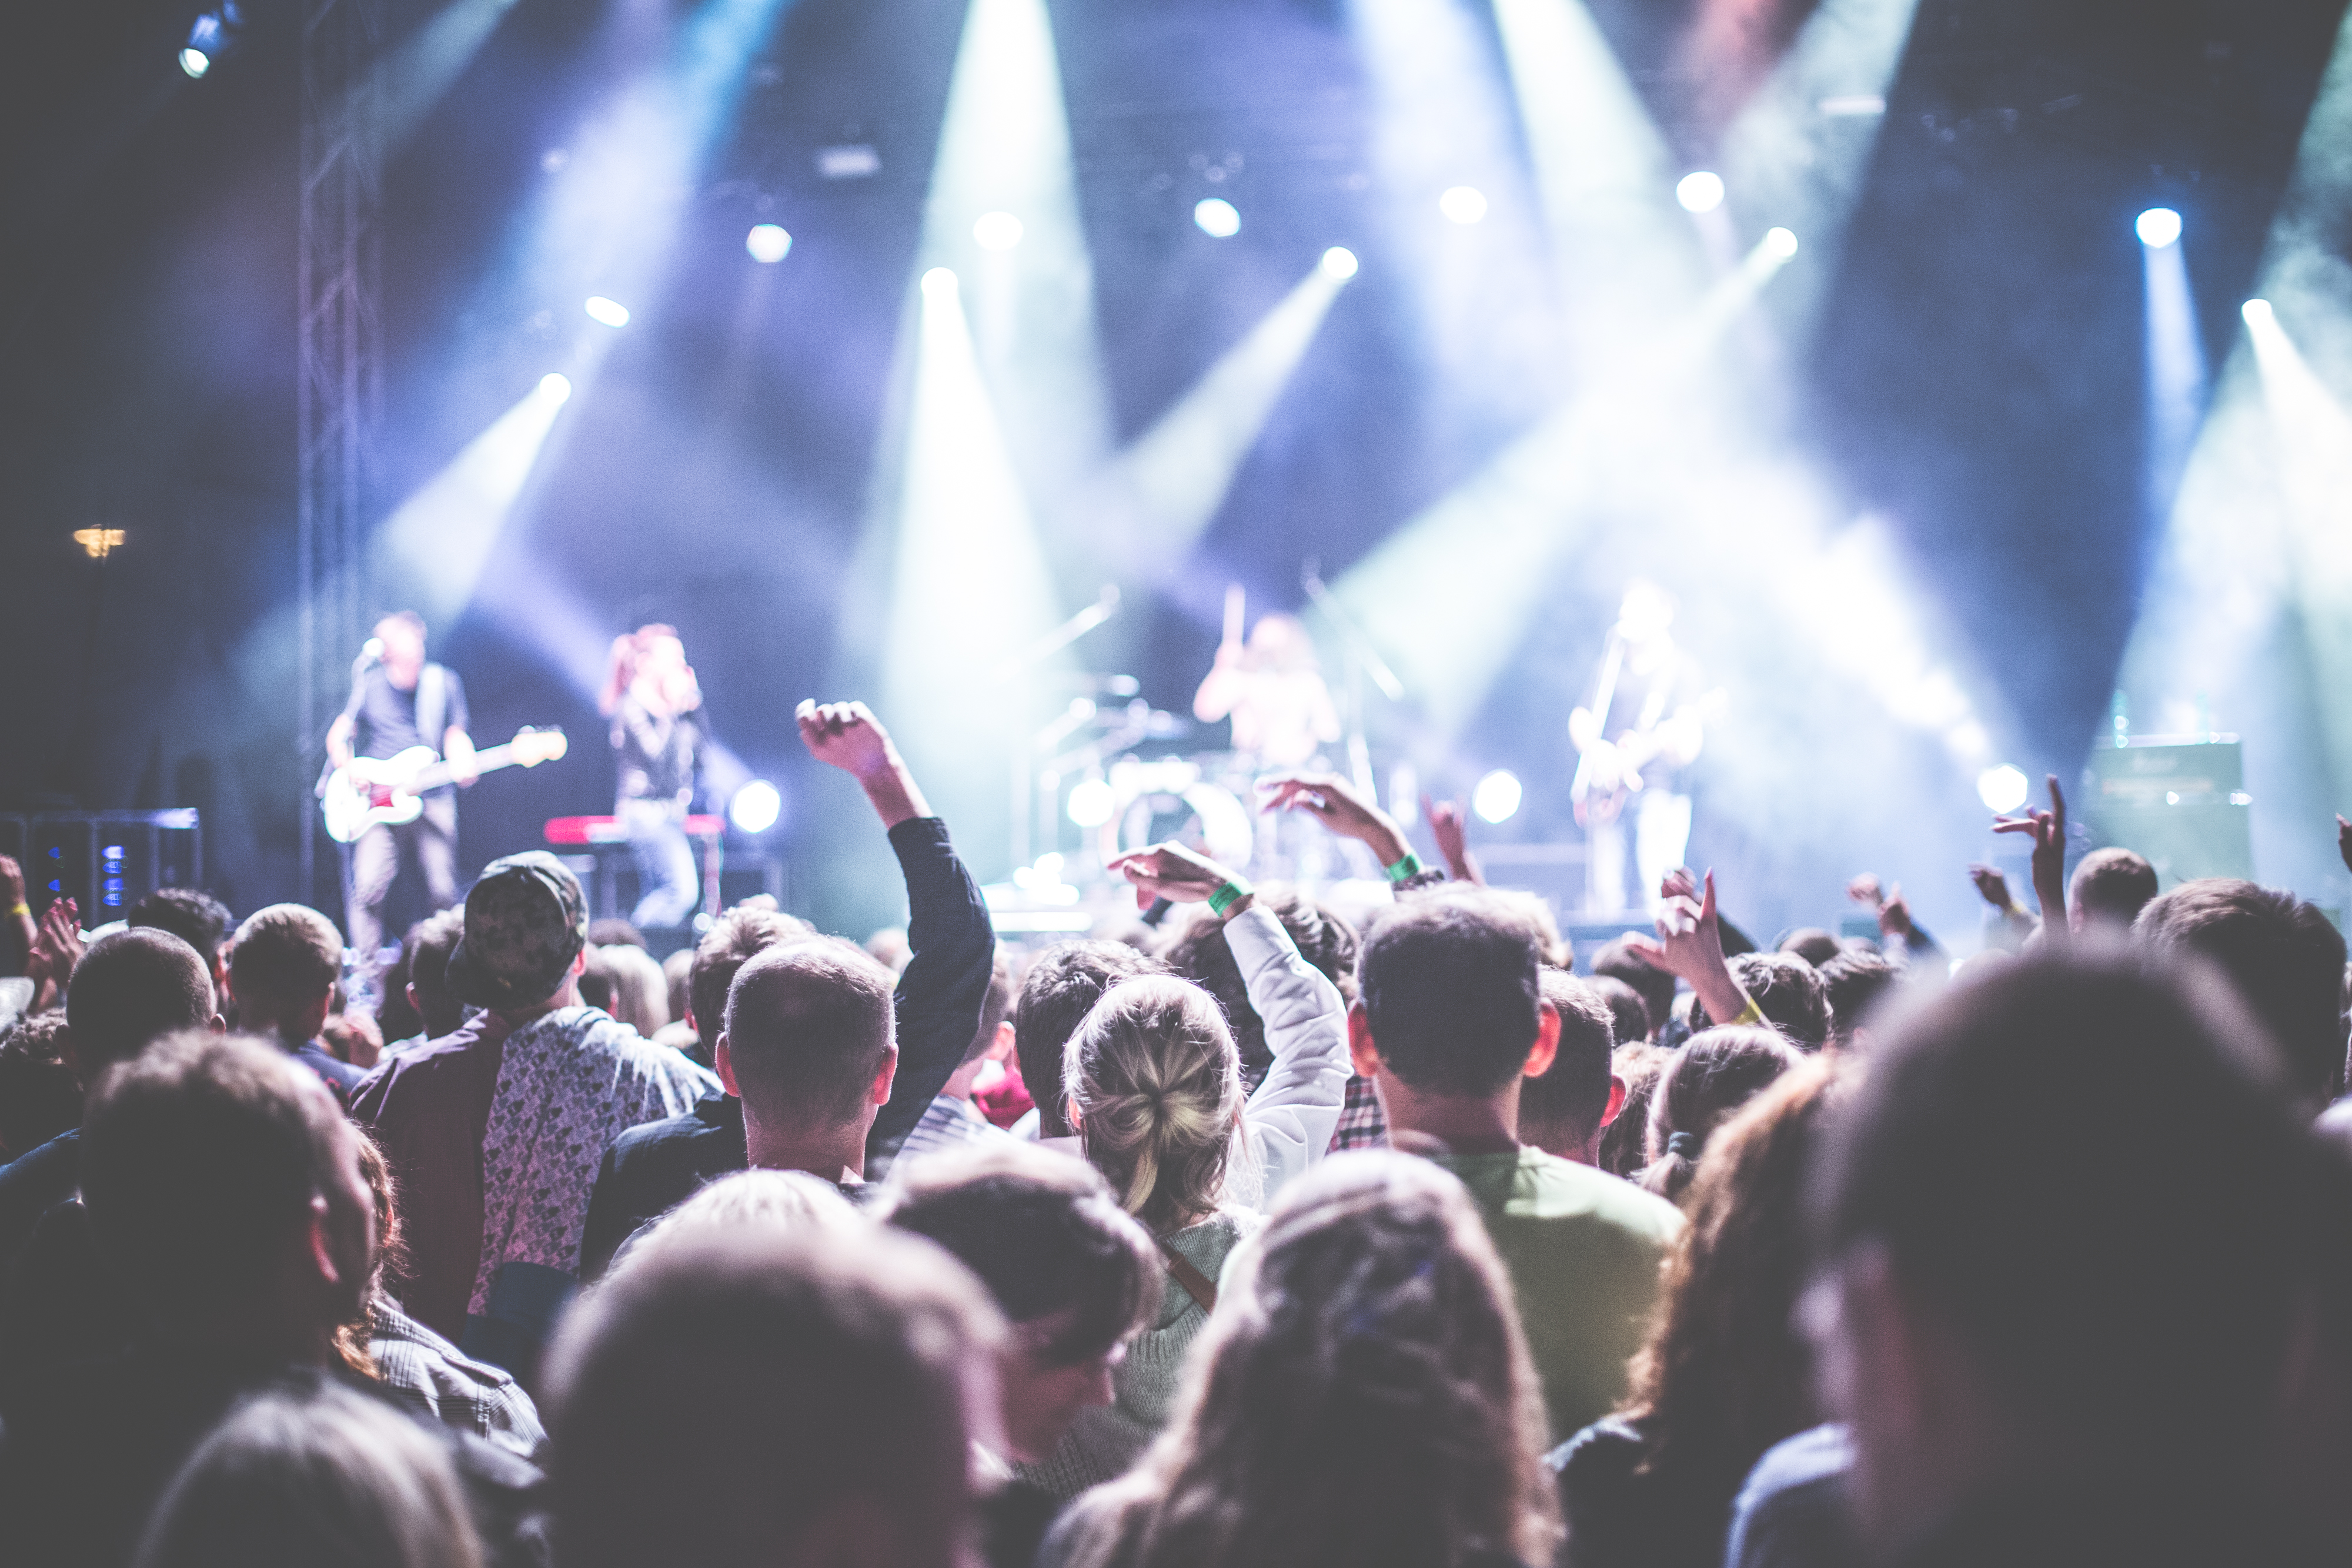 New research finds superfans average 10 gigs every year [study]